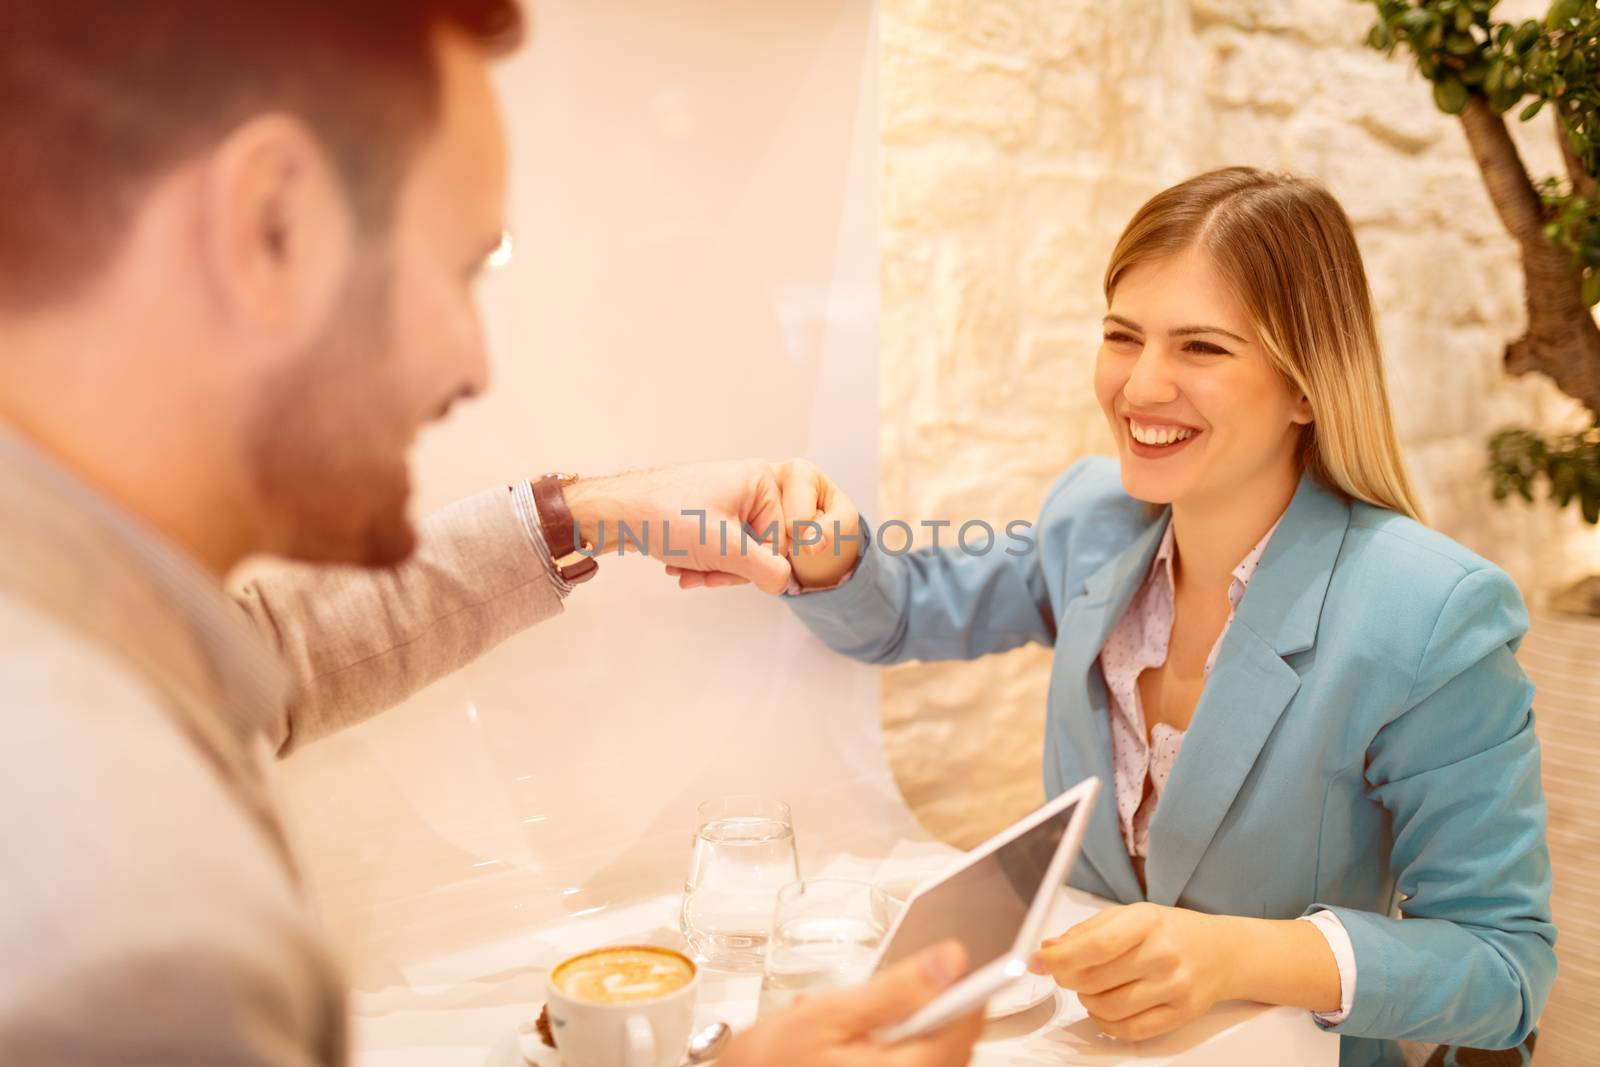 Young businesspeople on a break in a cafe. They are celebrating successful deal with fist bump. Selective focus. Focus on busineswosman.